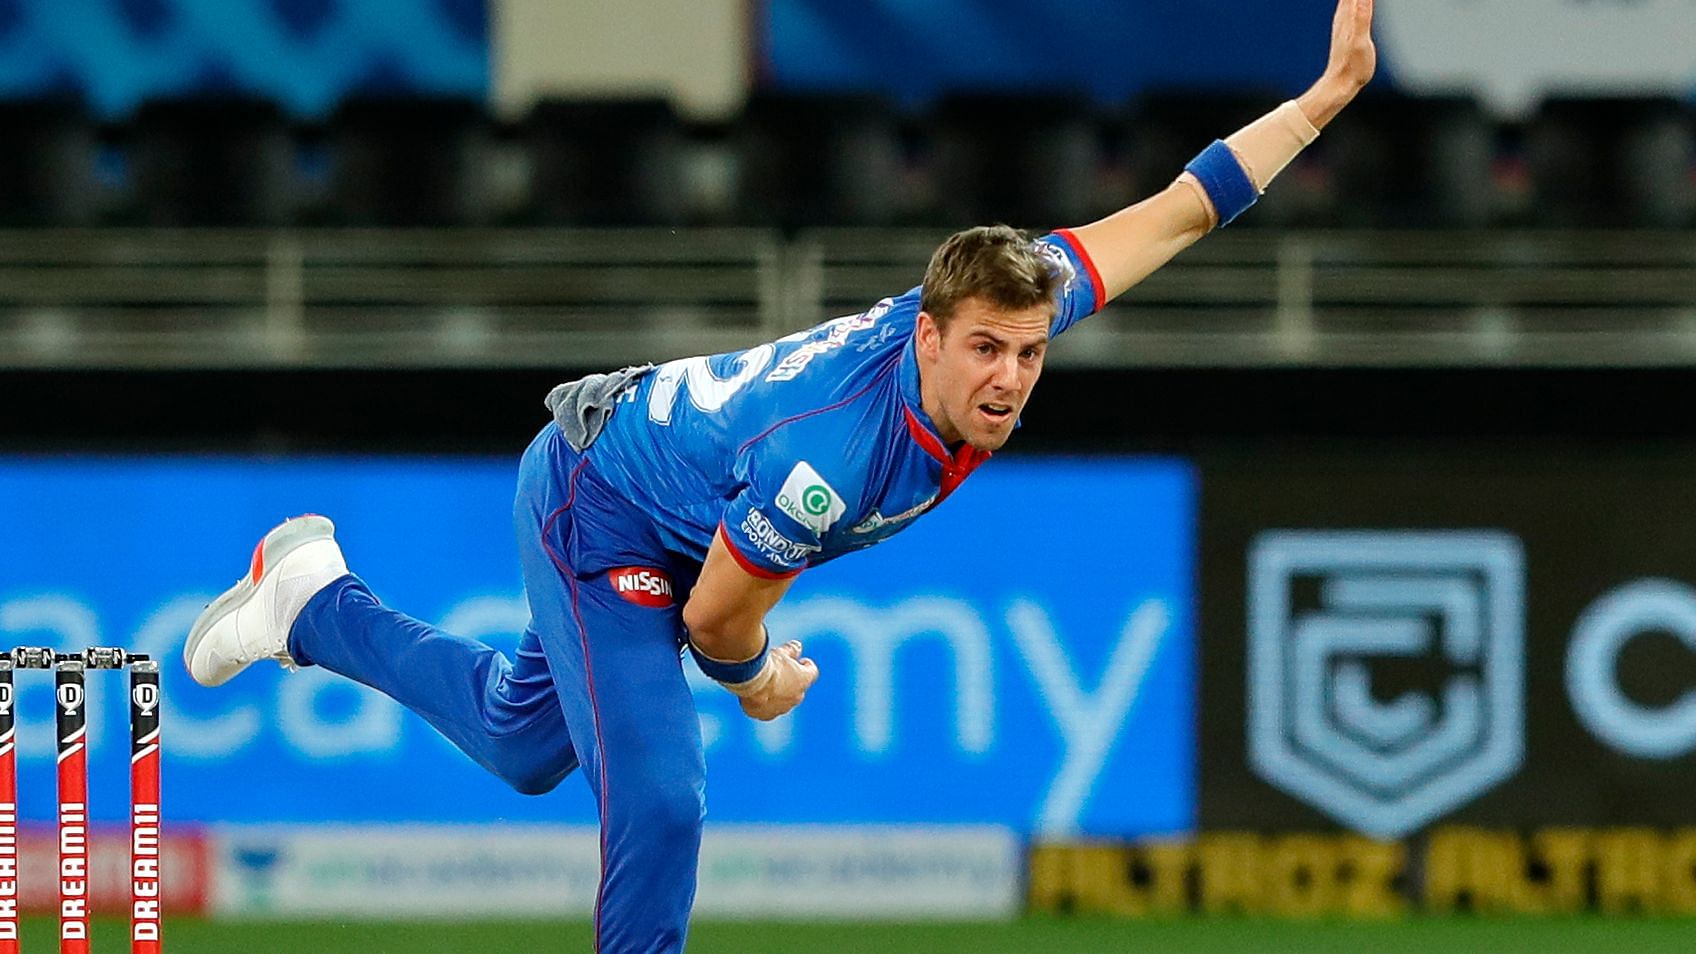 Delhi Capitals (DC) fast bowler Anrich Nortje smashed Dale Steyn’s 8-year record for he fastest delivery in IPL history last year.